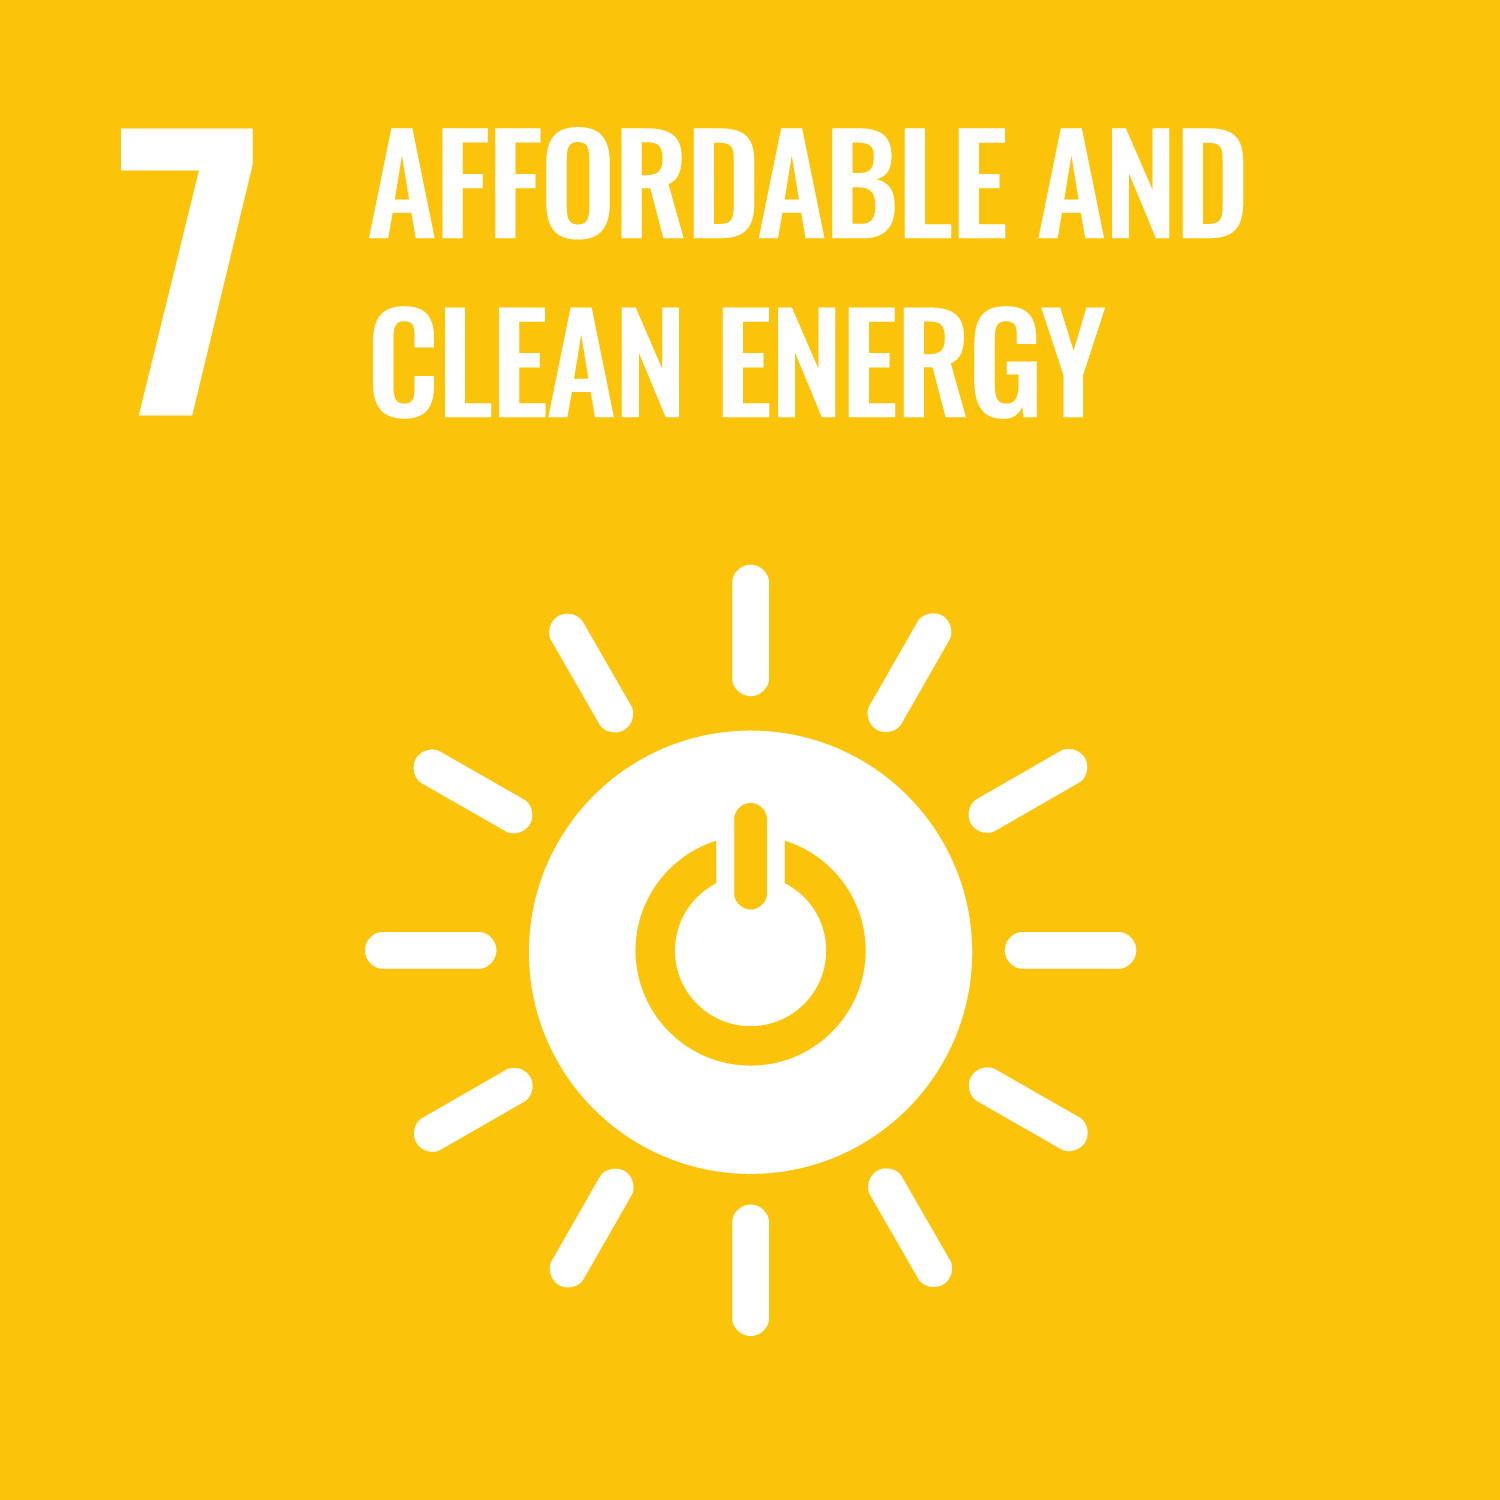 UN Goal 7: Affordable and clean energy